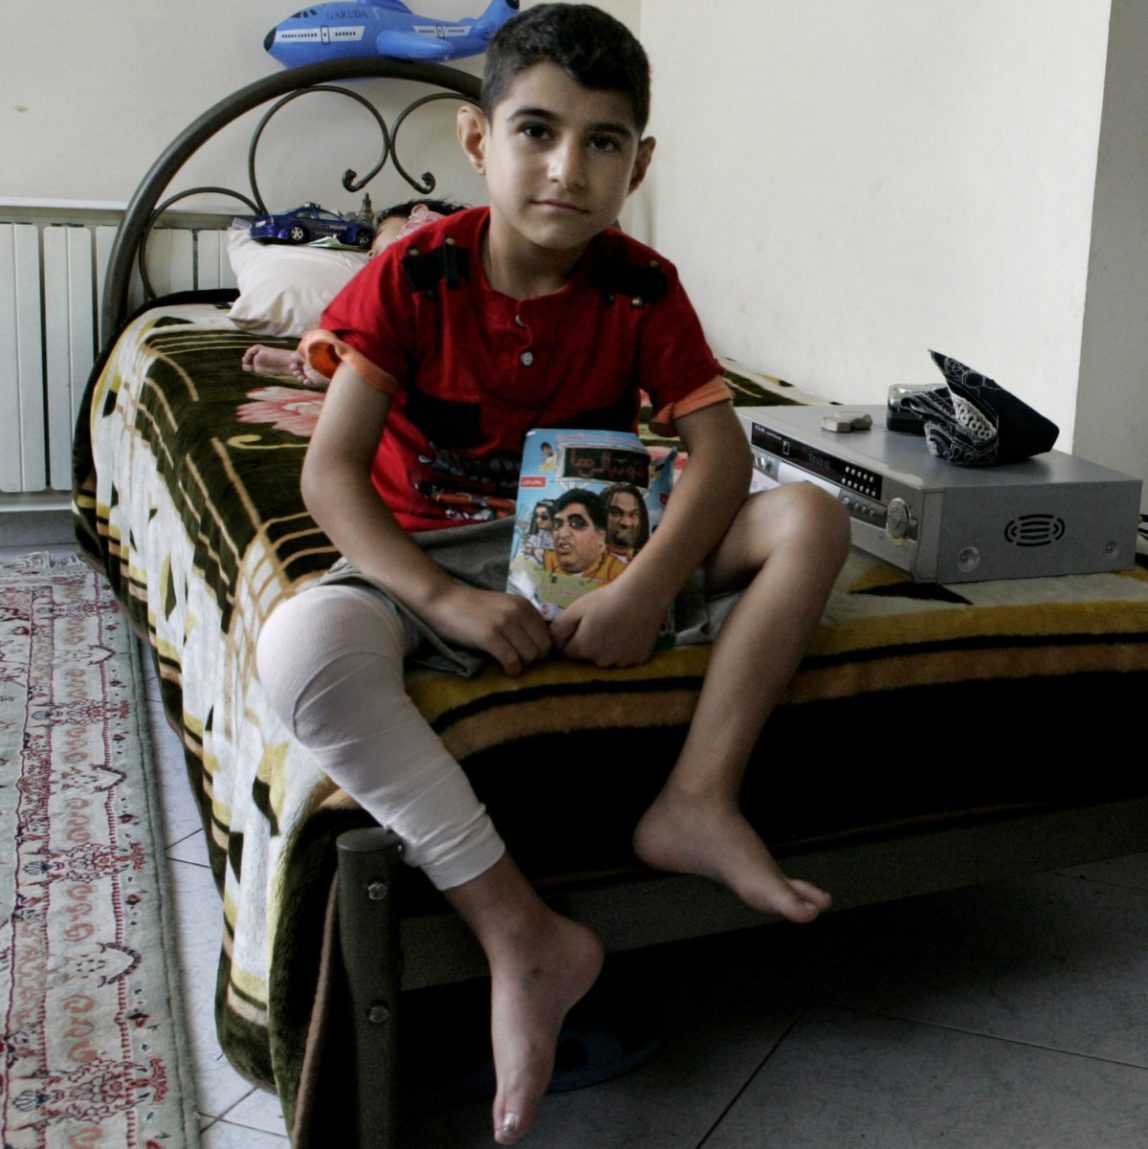 In this Sunday, Aug. 5, 2012 photo, Iranian Milad Rostami, 8, who is suffering from hemophilia, currently recovering from knee surgery, sits on his bed at Iran's Hemophilia Association center, in Tehran, Iran. (AP Photo/Vahid Salemi)